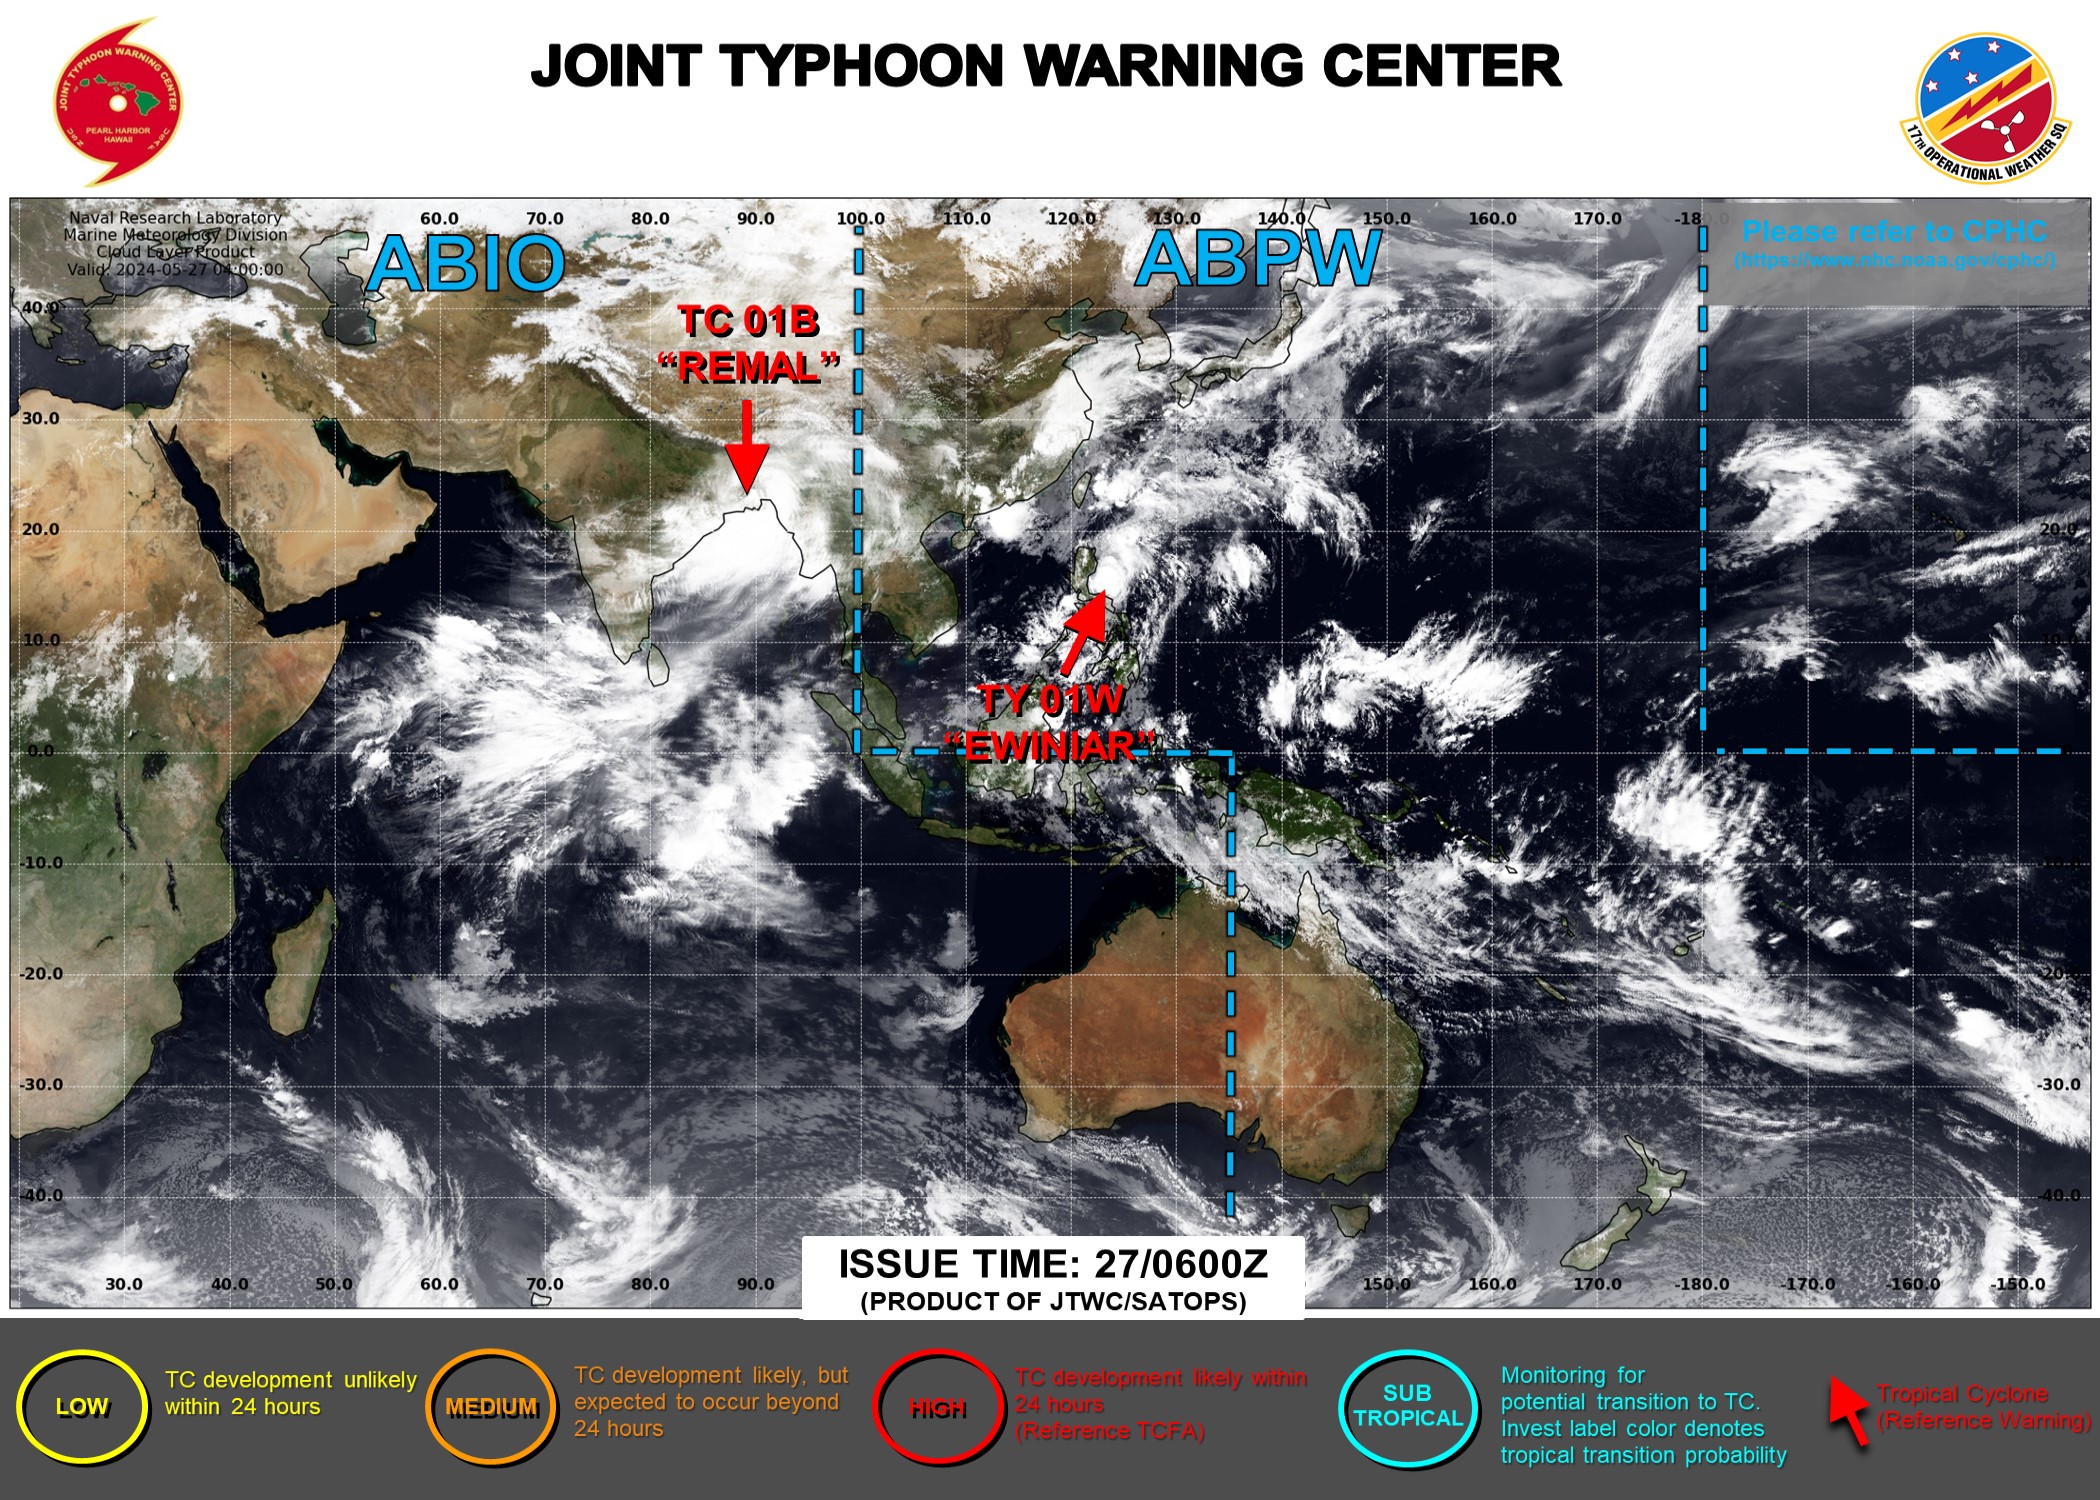 JTWC IS ISSUING 6HOURLY WARNINGS AND 3HOURLY SATELLITE BULLETINS ON 01W. 3HOURLY SATELLITE BULLETINS ARE ISSUED ON 01B OVERLAND REMNANTS